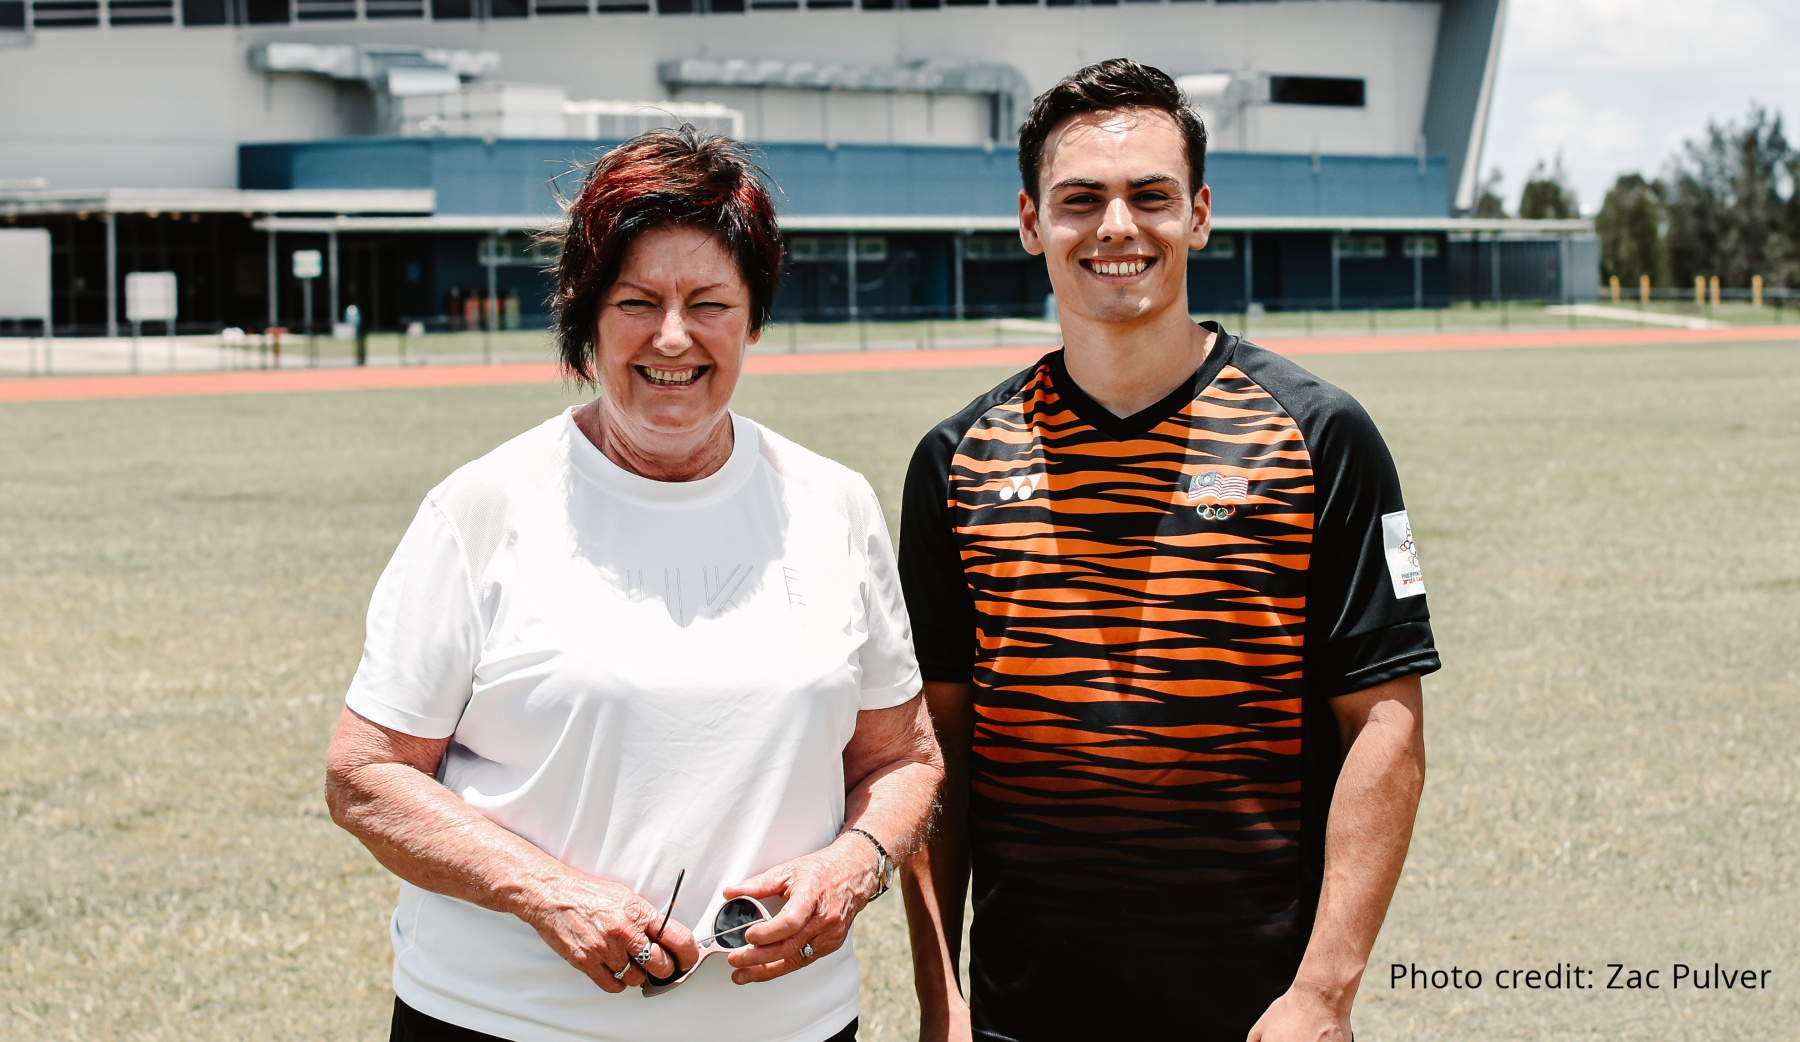 Head coach Denise Boyd and Russel Taib, photo credit - Zac Pulver